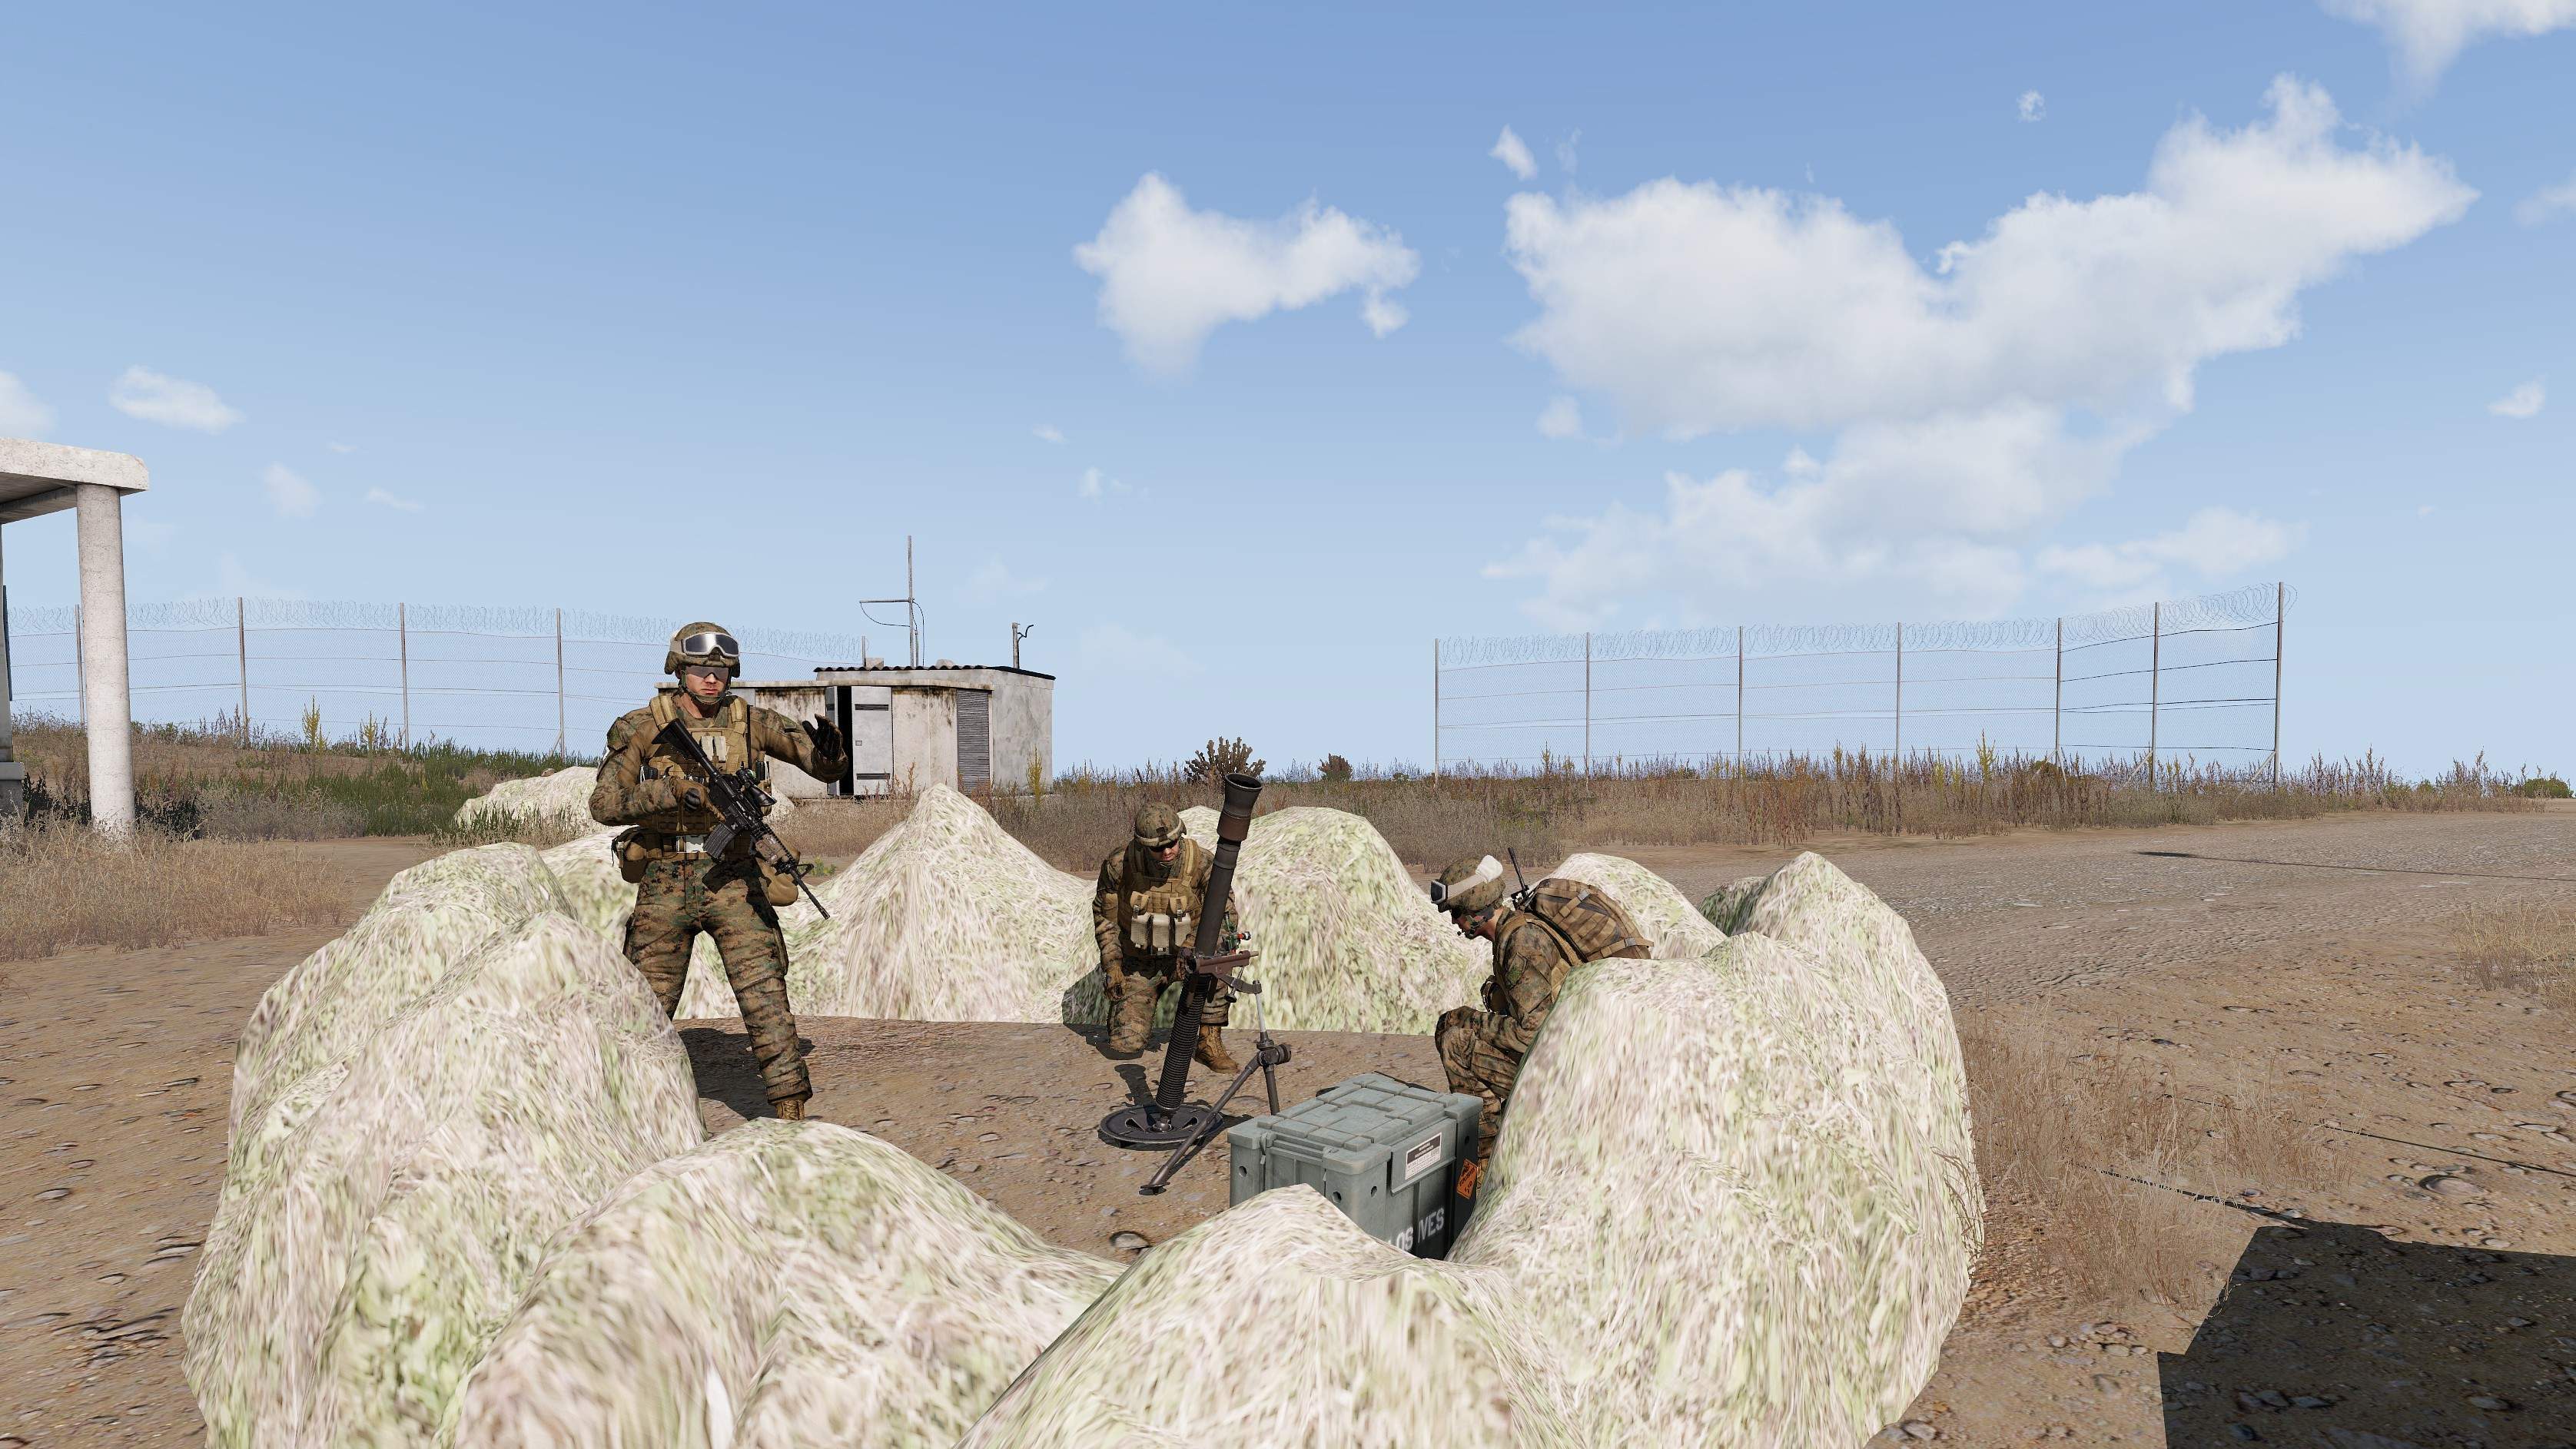 Hitman Base deployed with an 82 mm mortar